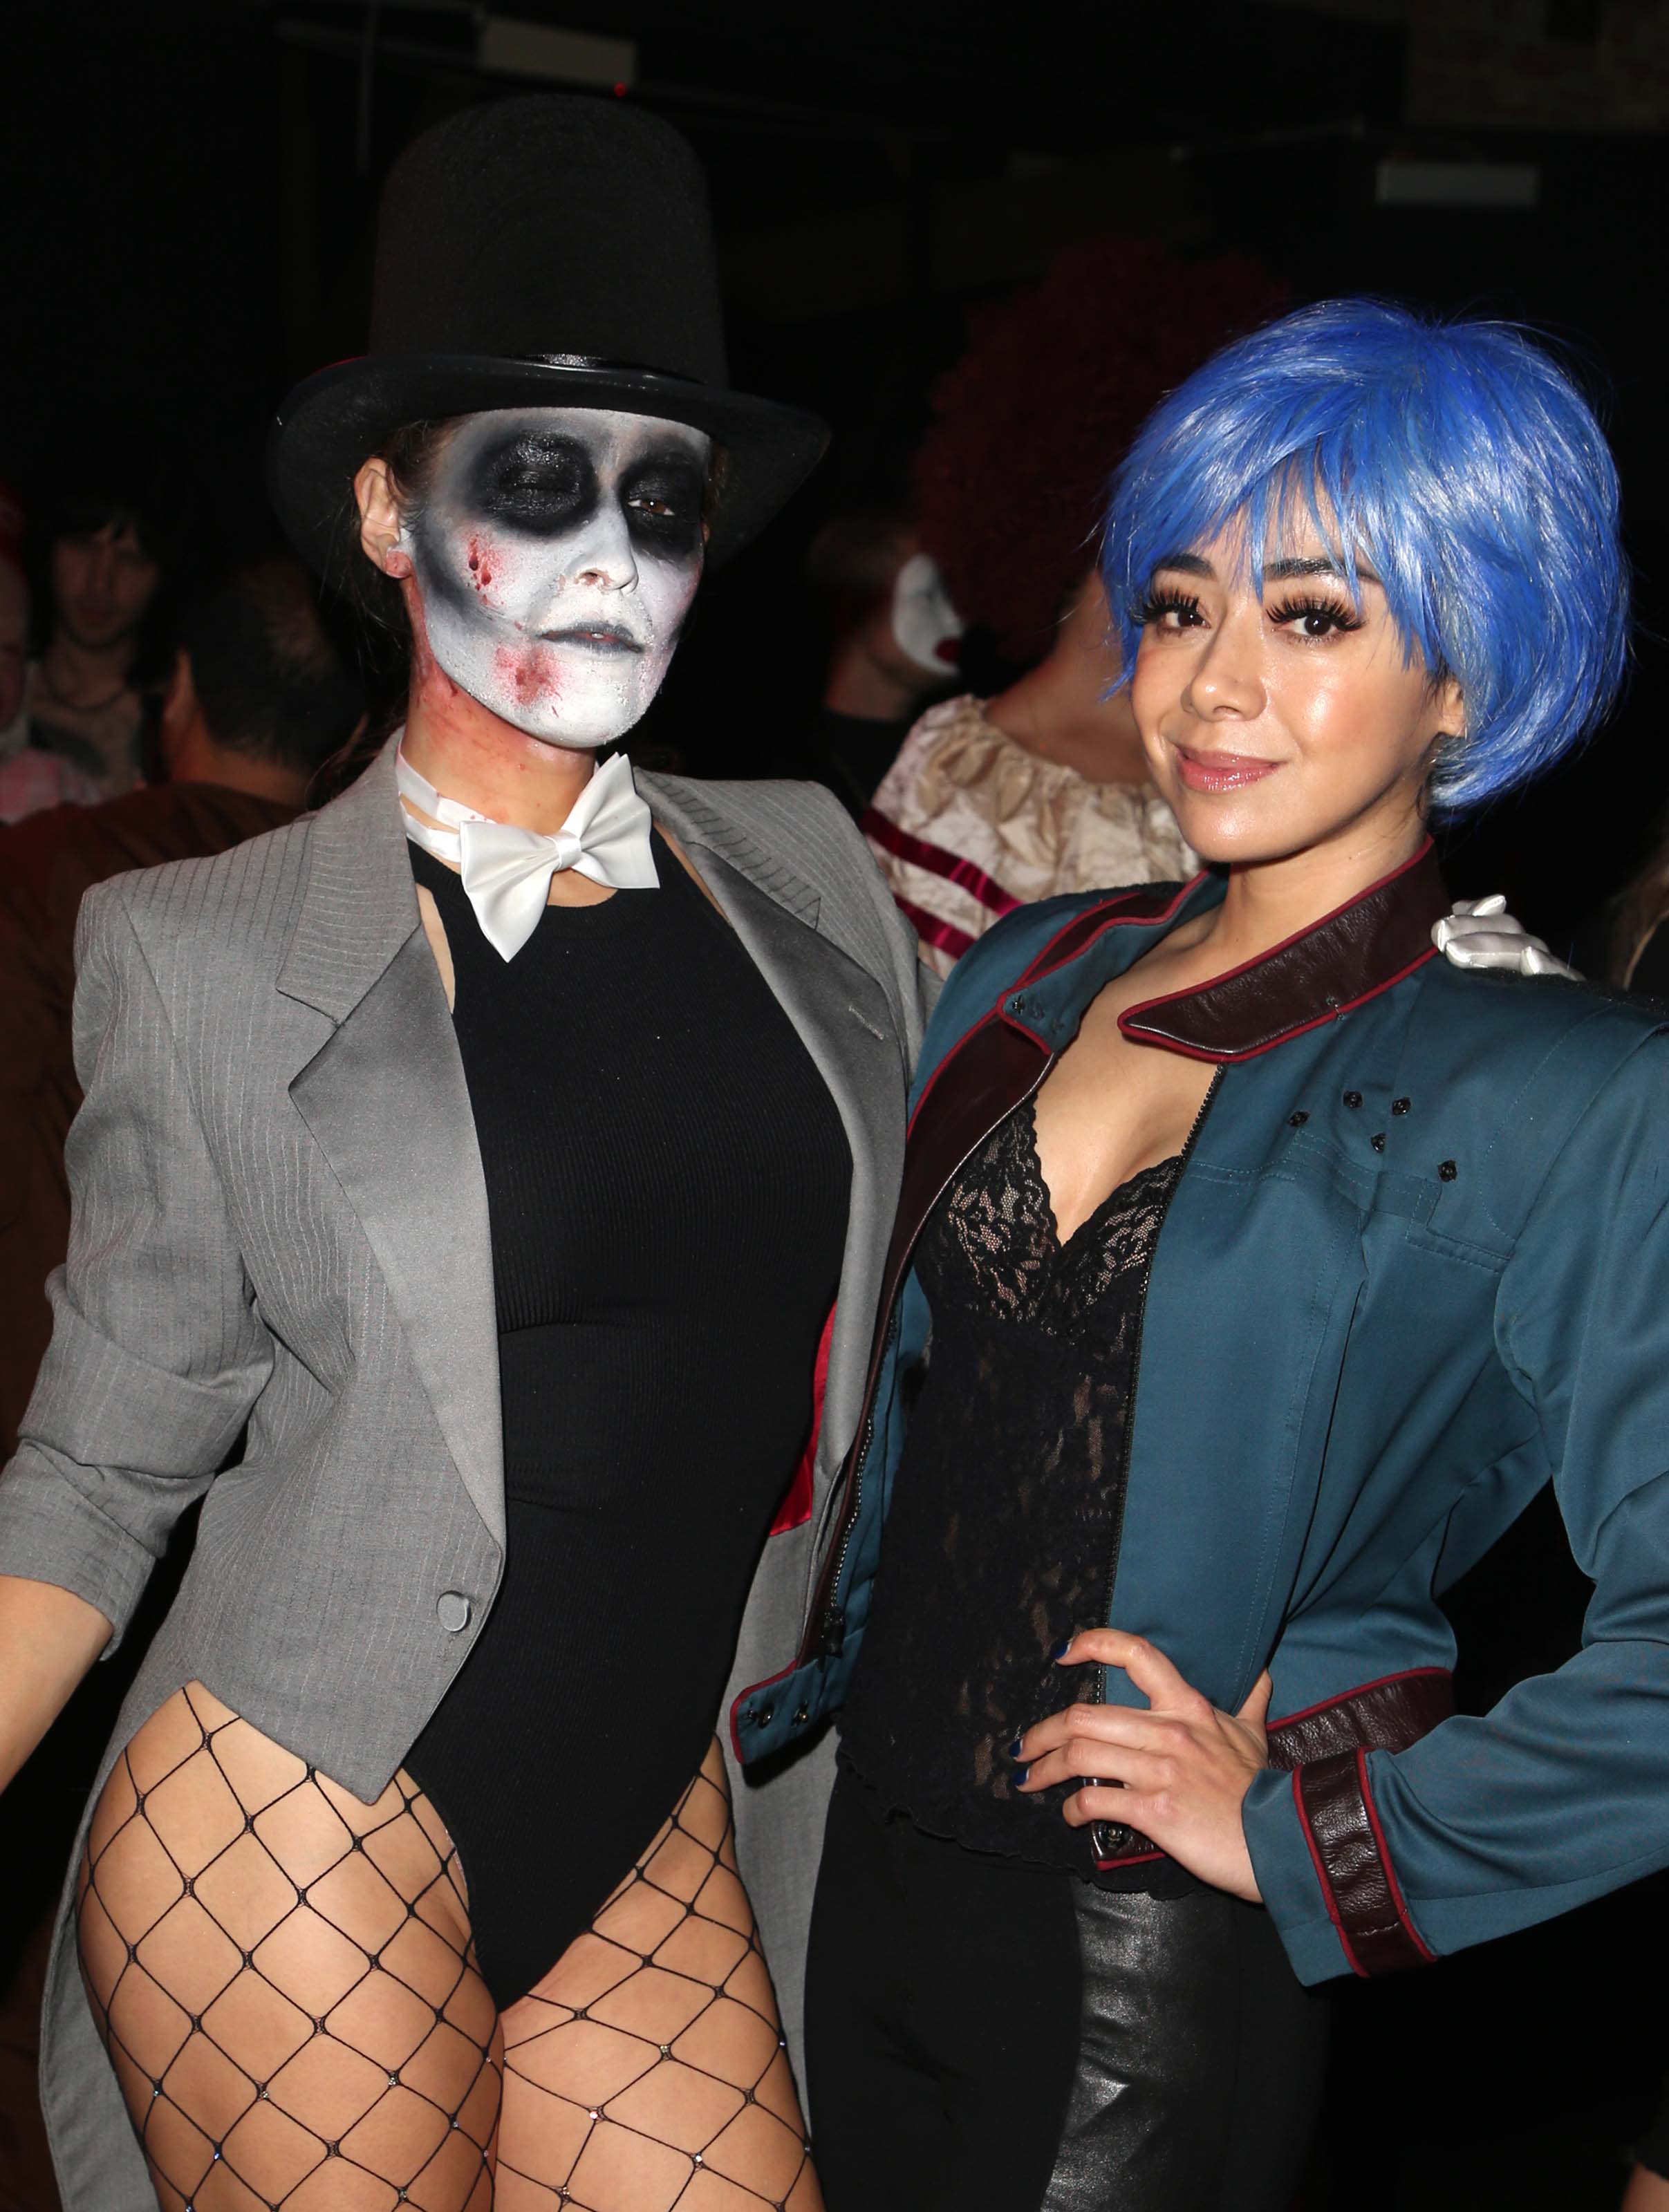 Aimee Garcia attends Just Jared’s 7th Annual Halloween Party